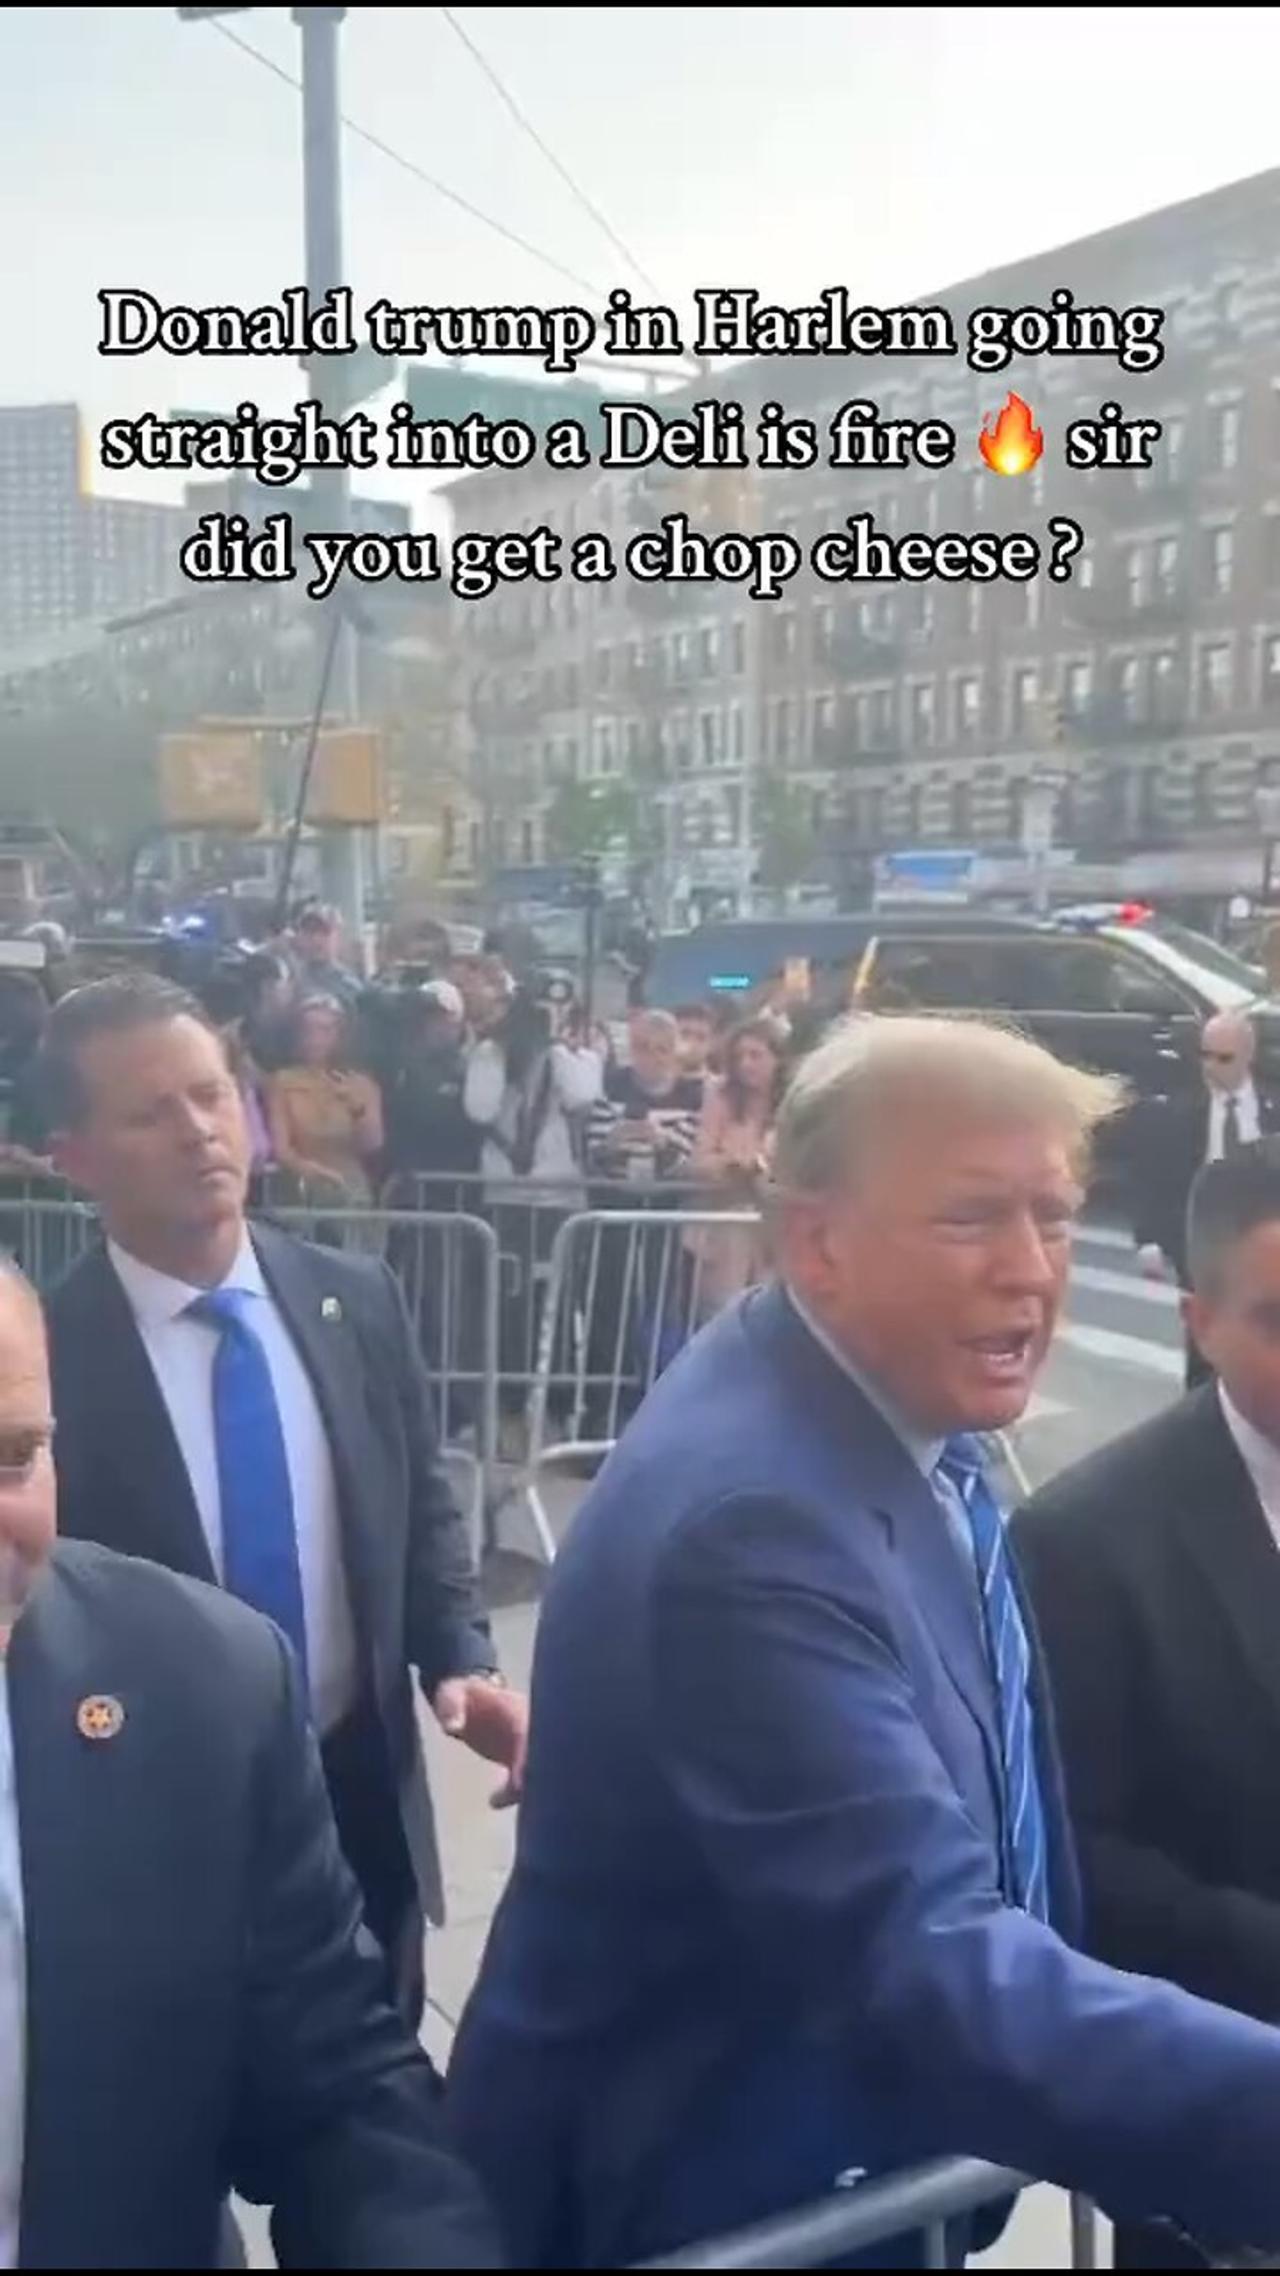 Trump is loved in Harlem!  Can someone please tell me what a chop cheese is?